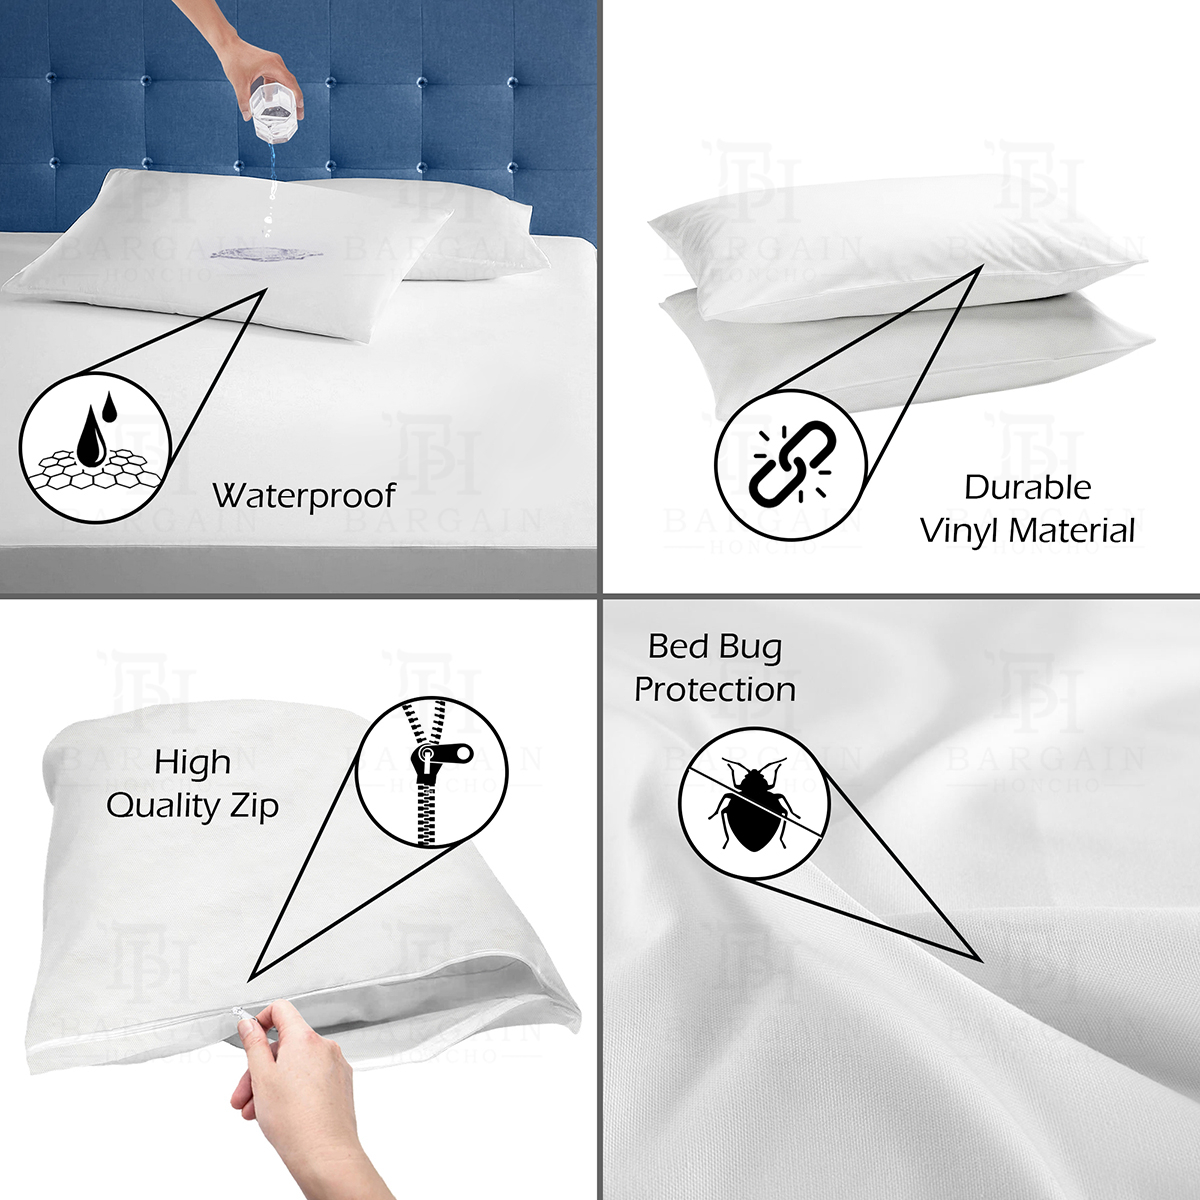 Heavyweight Zippered Waterproof & Bed-Bug Proof Vinyl Mattress Cover Protector - 2-Pack Vinyl Pillow Covers